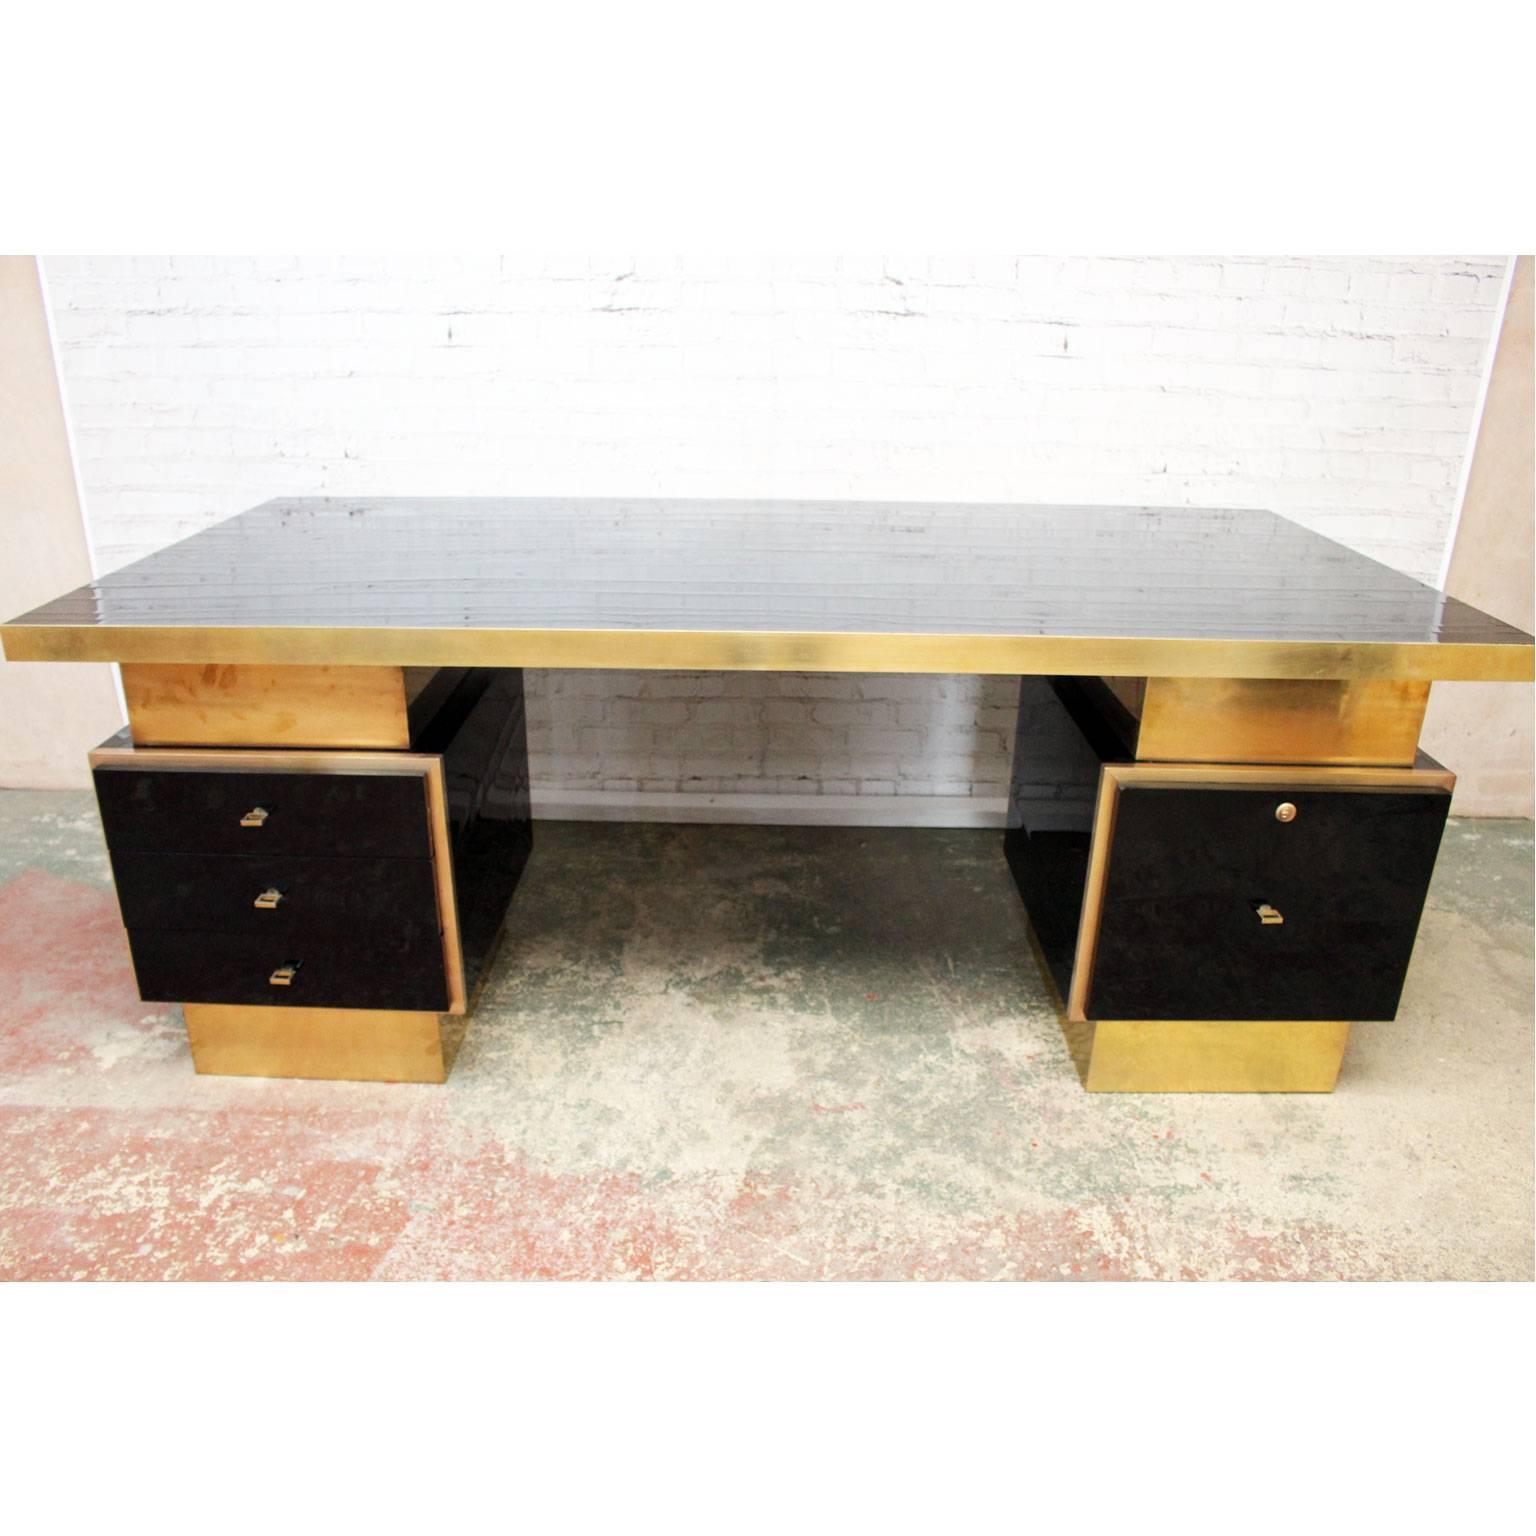 We believe this magnificent desk was designed by a top end French designer as a one-off commission in the 1970s and there are definite hints of the designer Guy Lefevre or Jean Claude Mayer. The scale is extraordinary. The lacquered top and